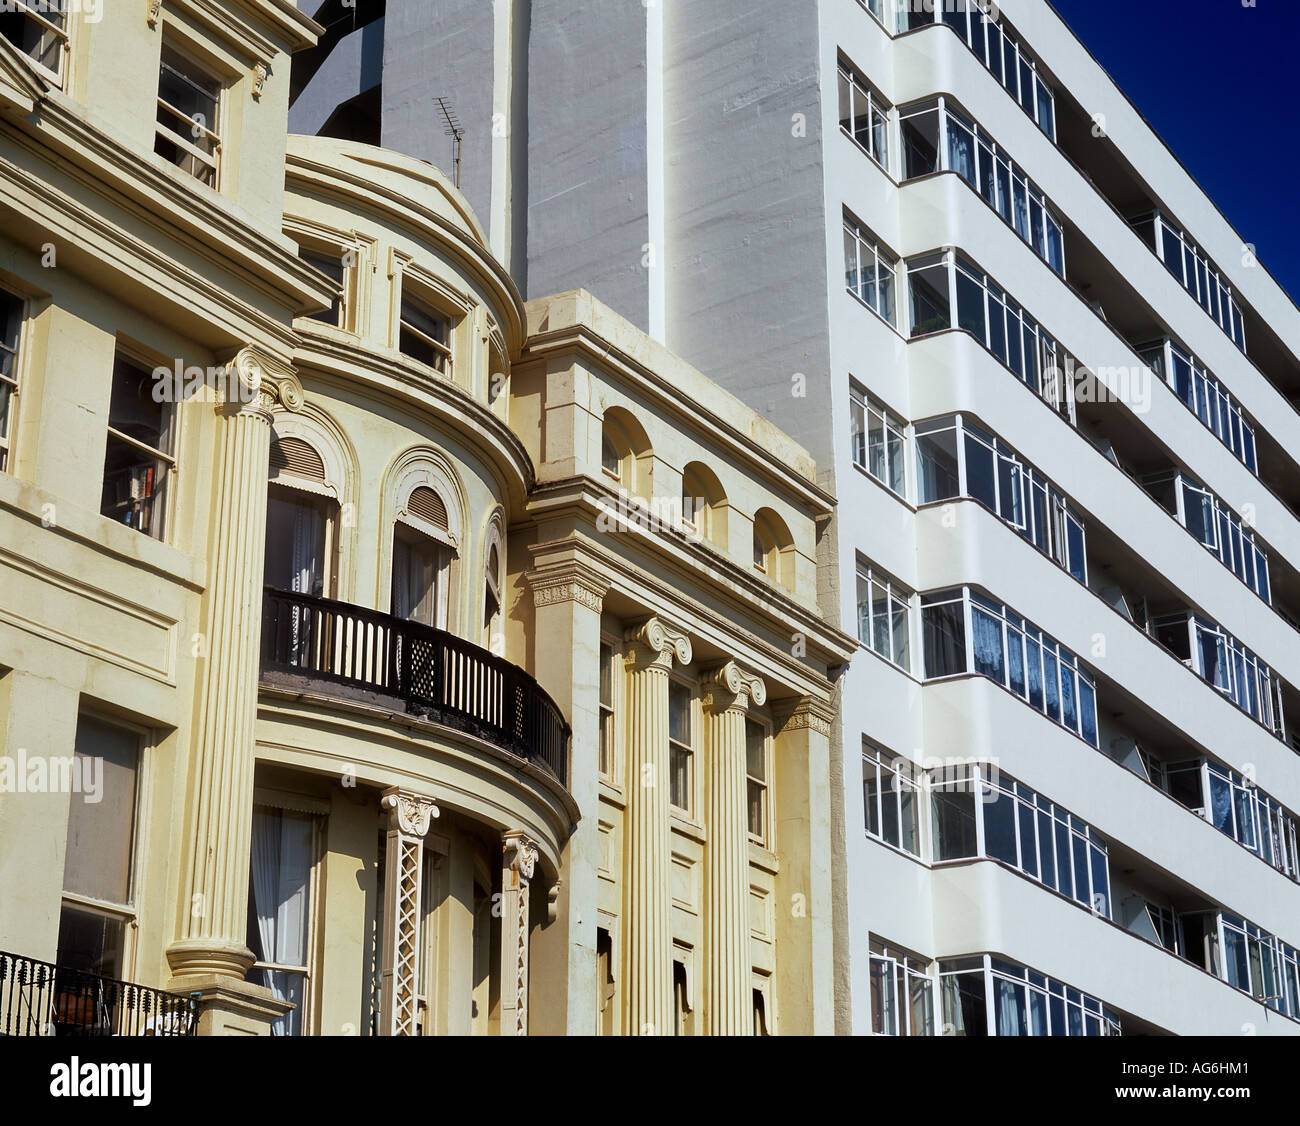 Contrasting styles of architecture in Brighton and Hove, East Sussex: regency terraces abut Embassy Court from the 1930s. Stock Photo